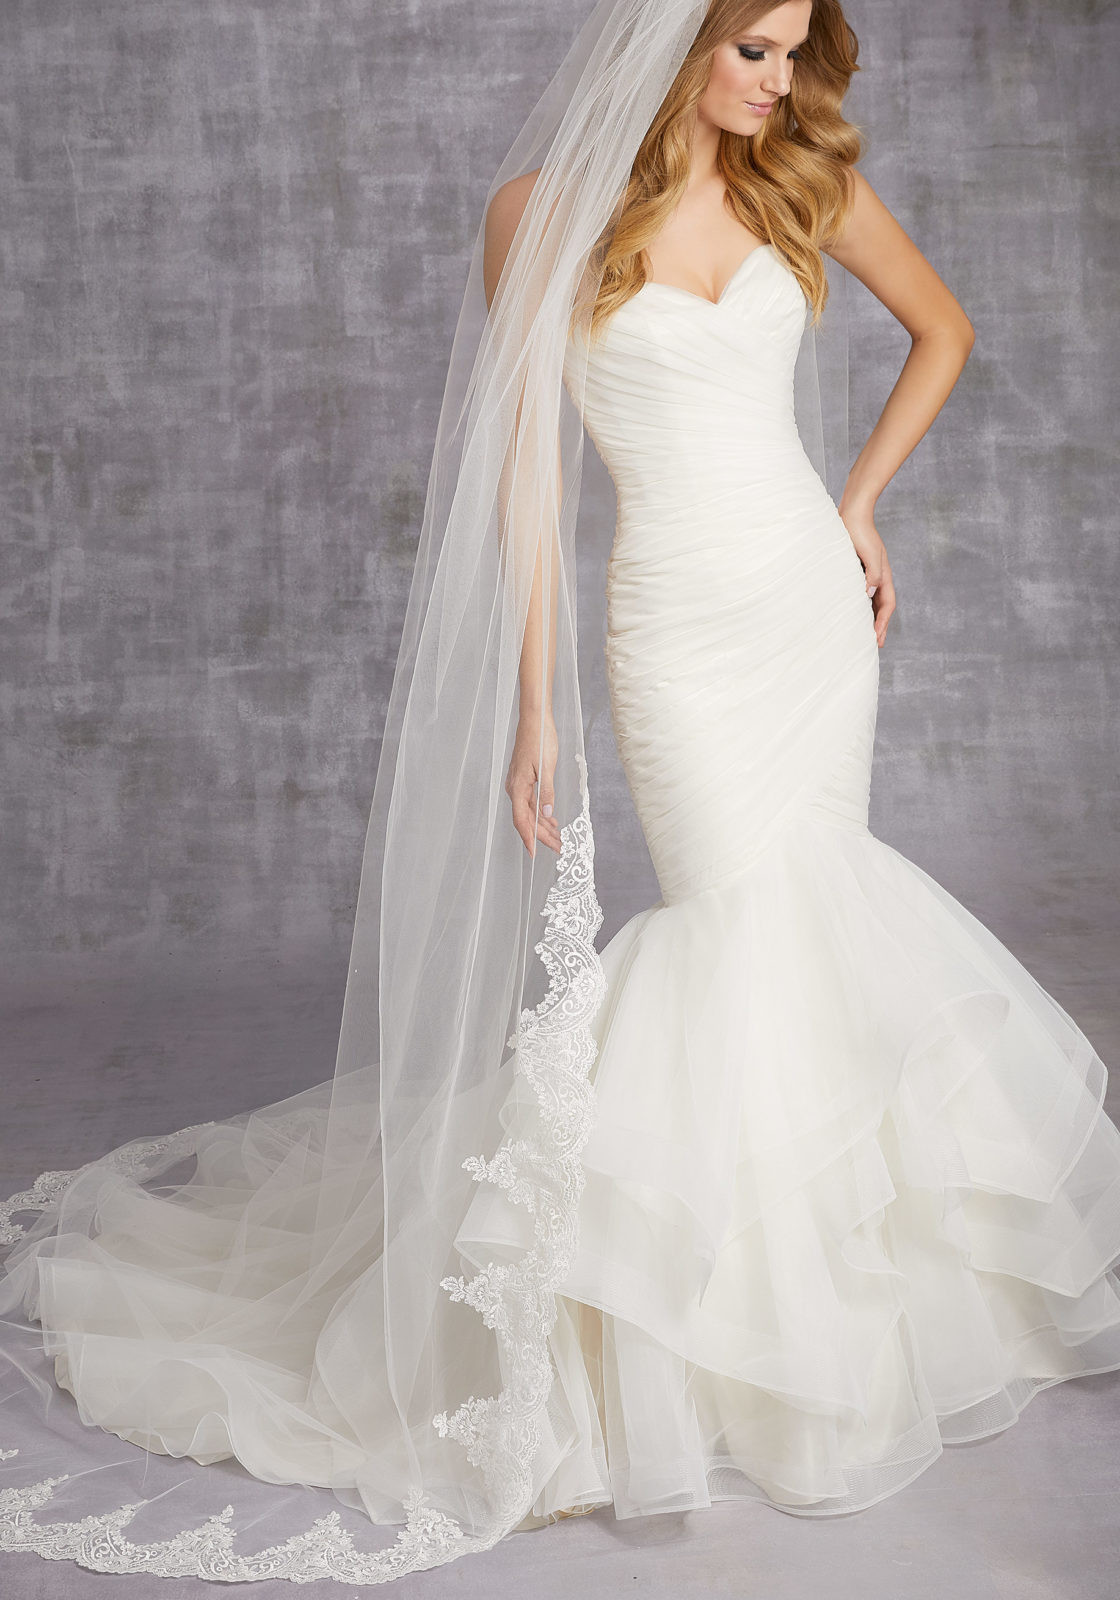 Wedding Dresses With Veils
 Scalloped Lace Veil Beaded With Clear Sequins